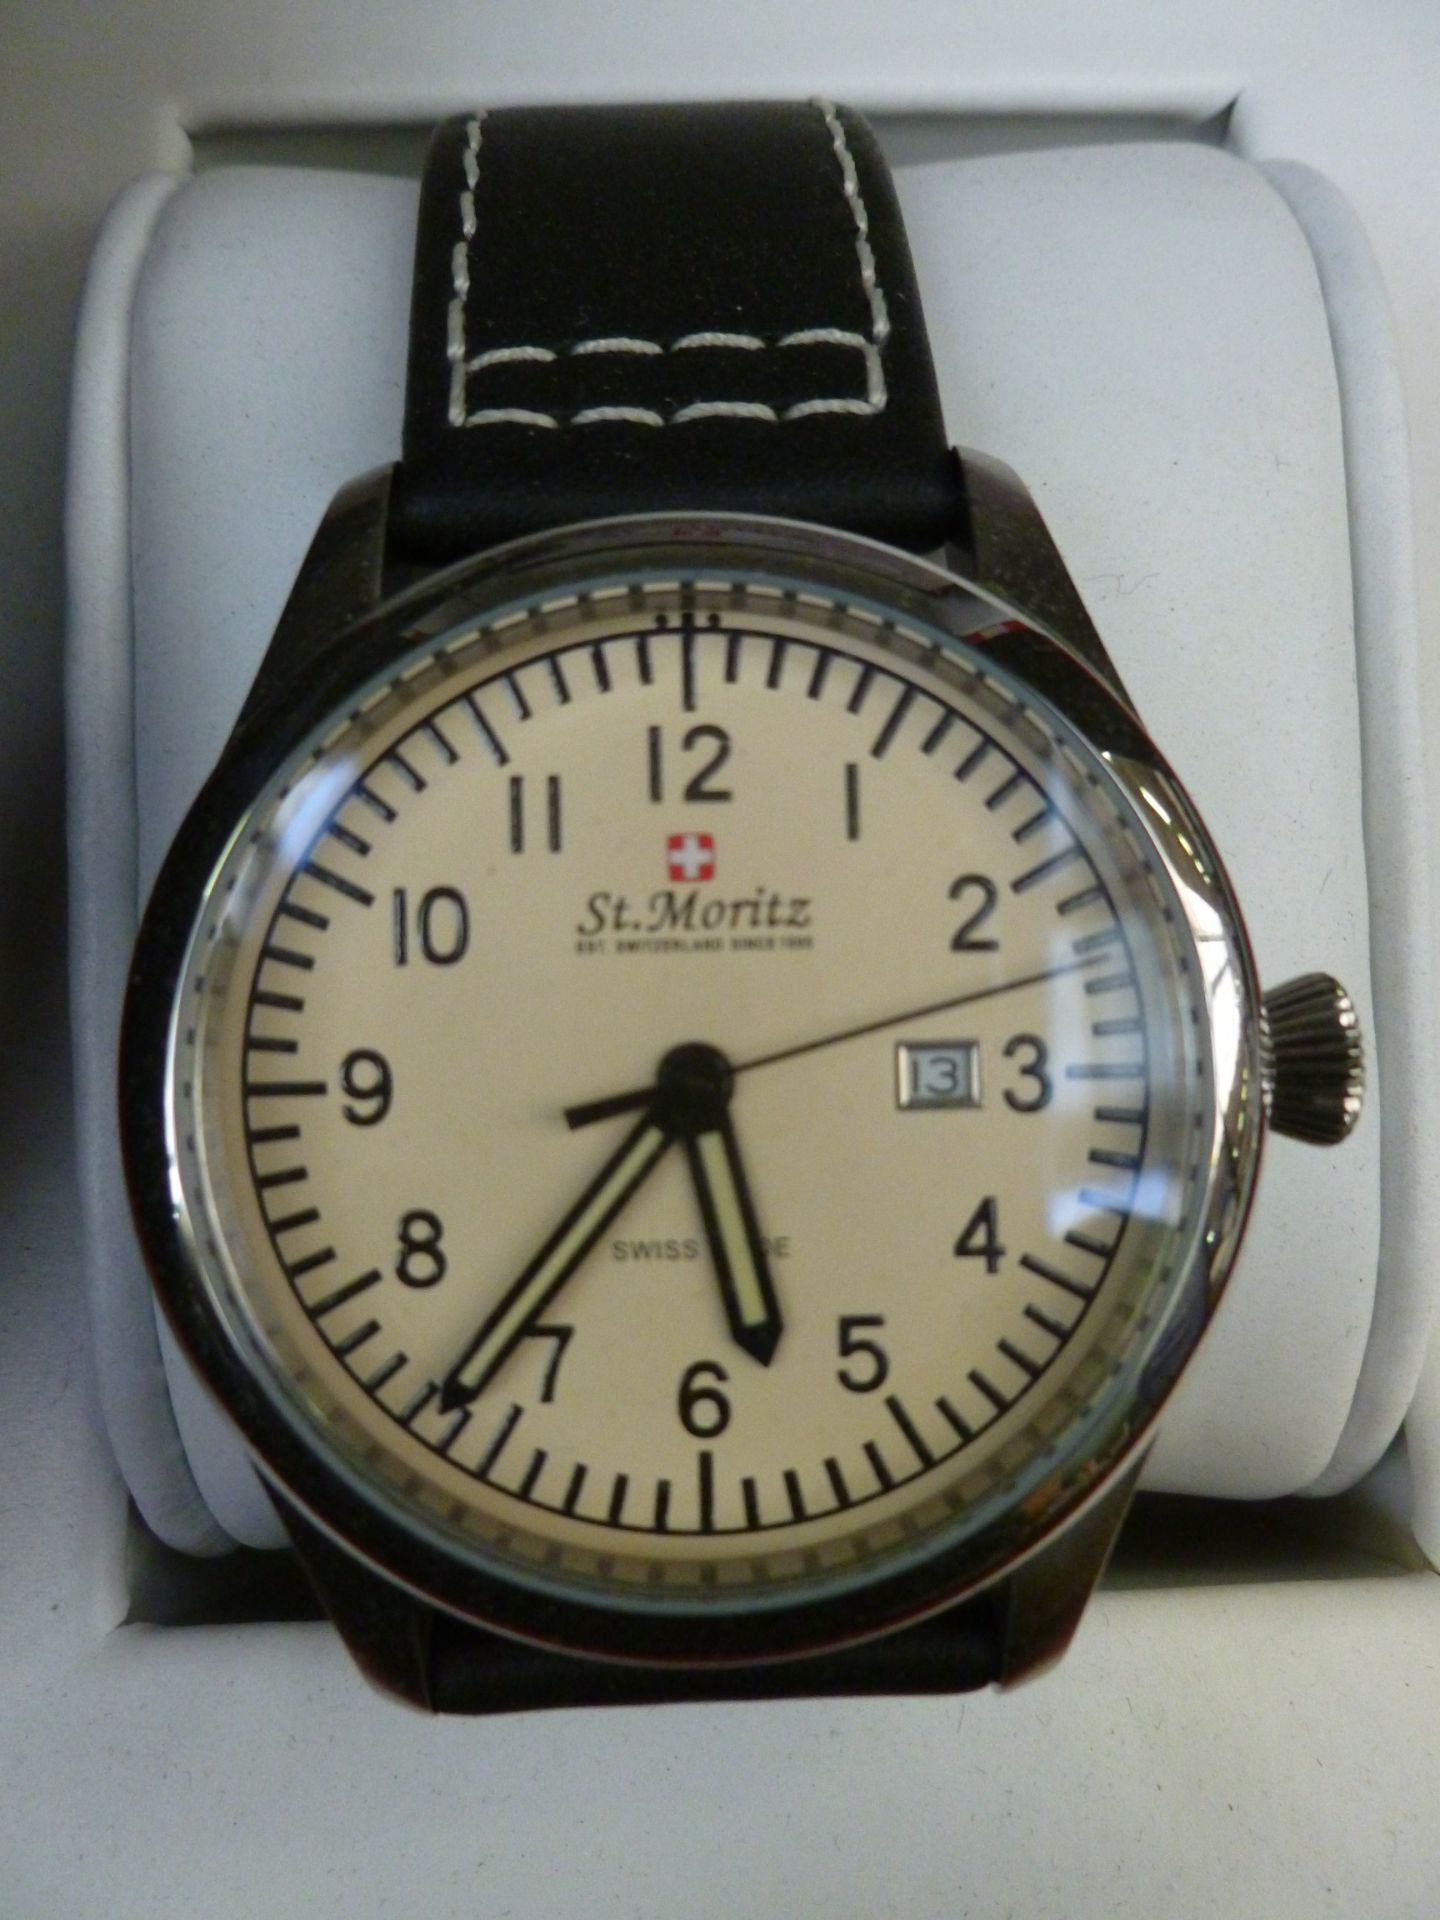 St Moritz of Switzerland Black Leather strapped watch, new and ticking in Presentation box.